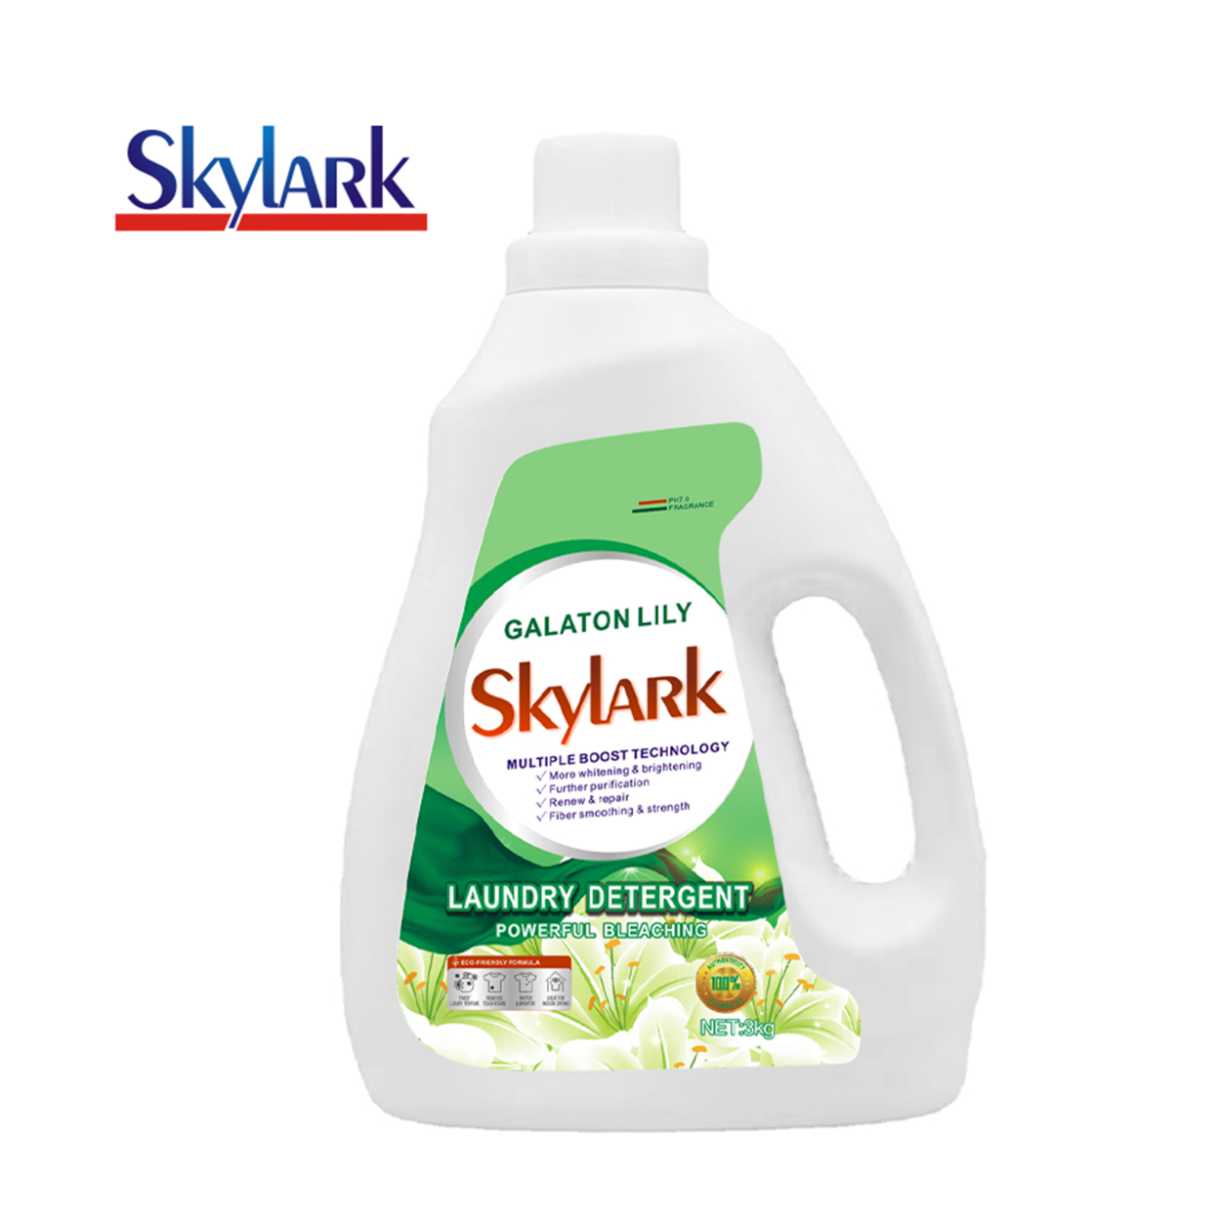 Brighter Whites and Tackle Stubborn Stains with Powerful Bleaching Galaton Lily Laundry Detergent